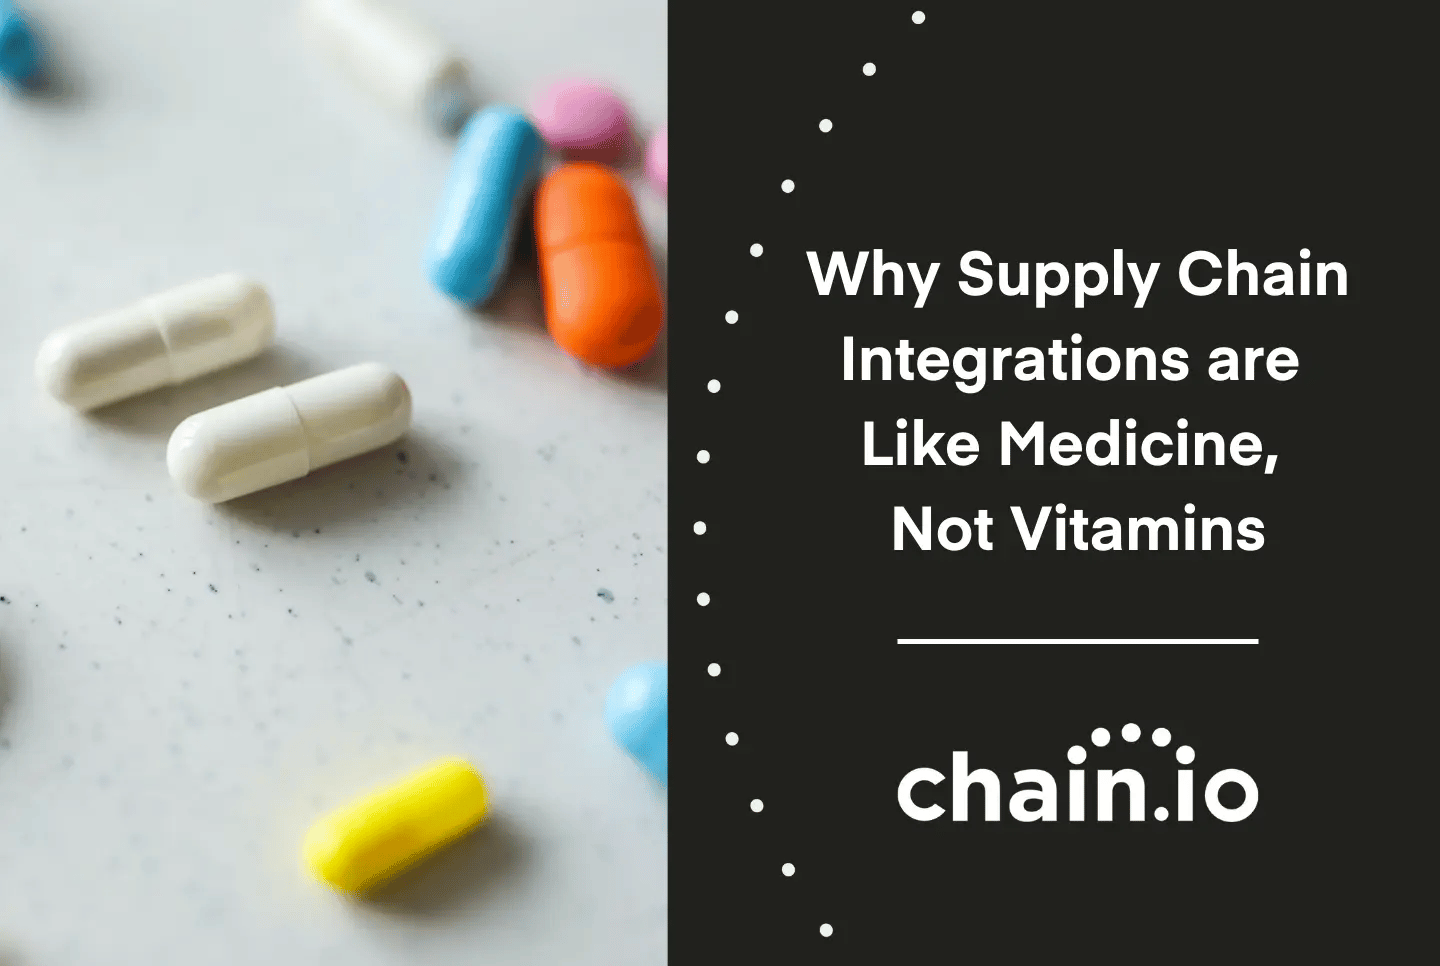 Medicine and vitamins with white text on black background reading "why supply chain integrations are like medicine, not vitamins."